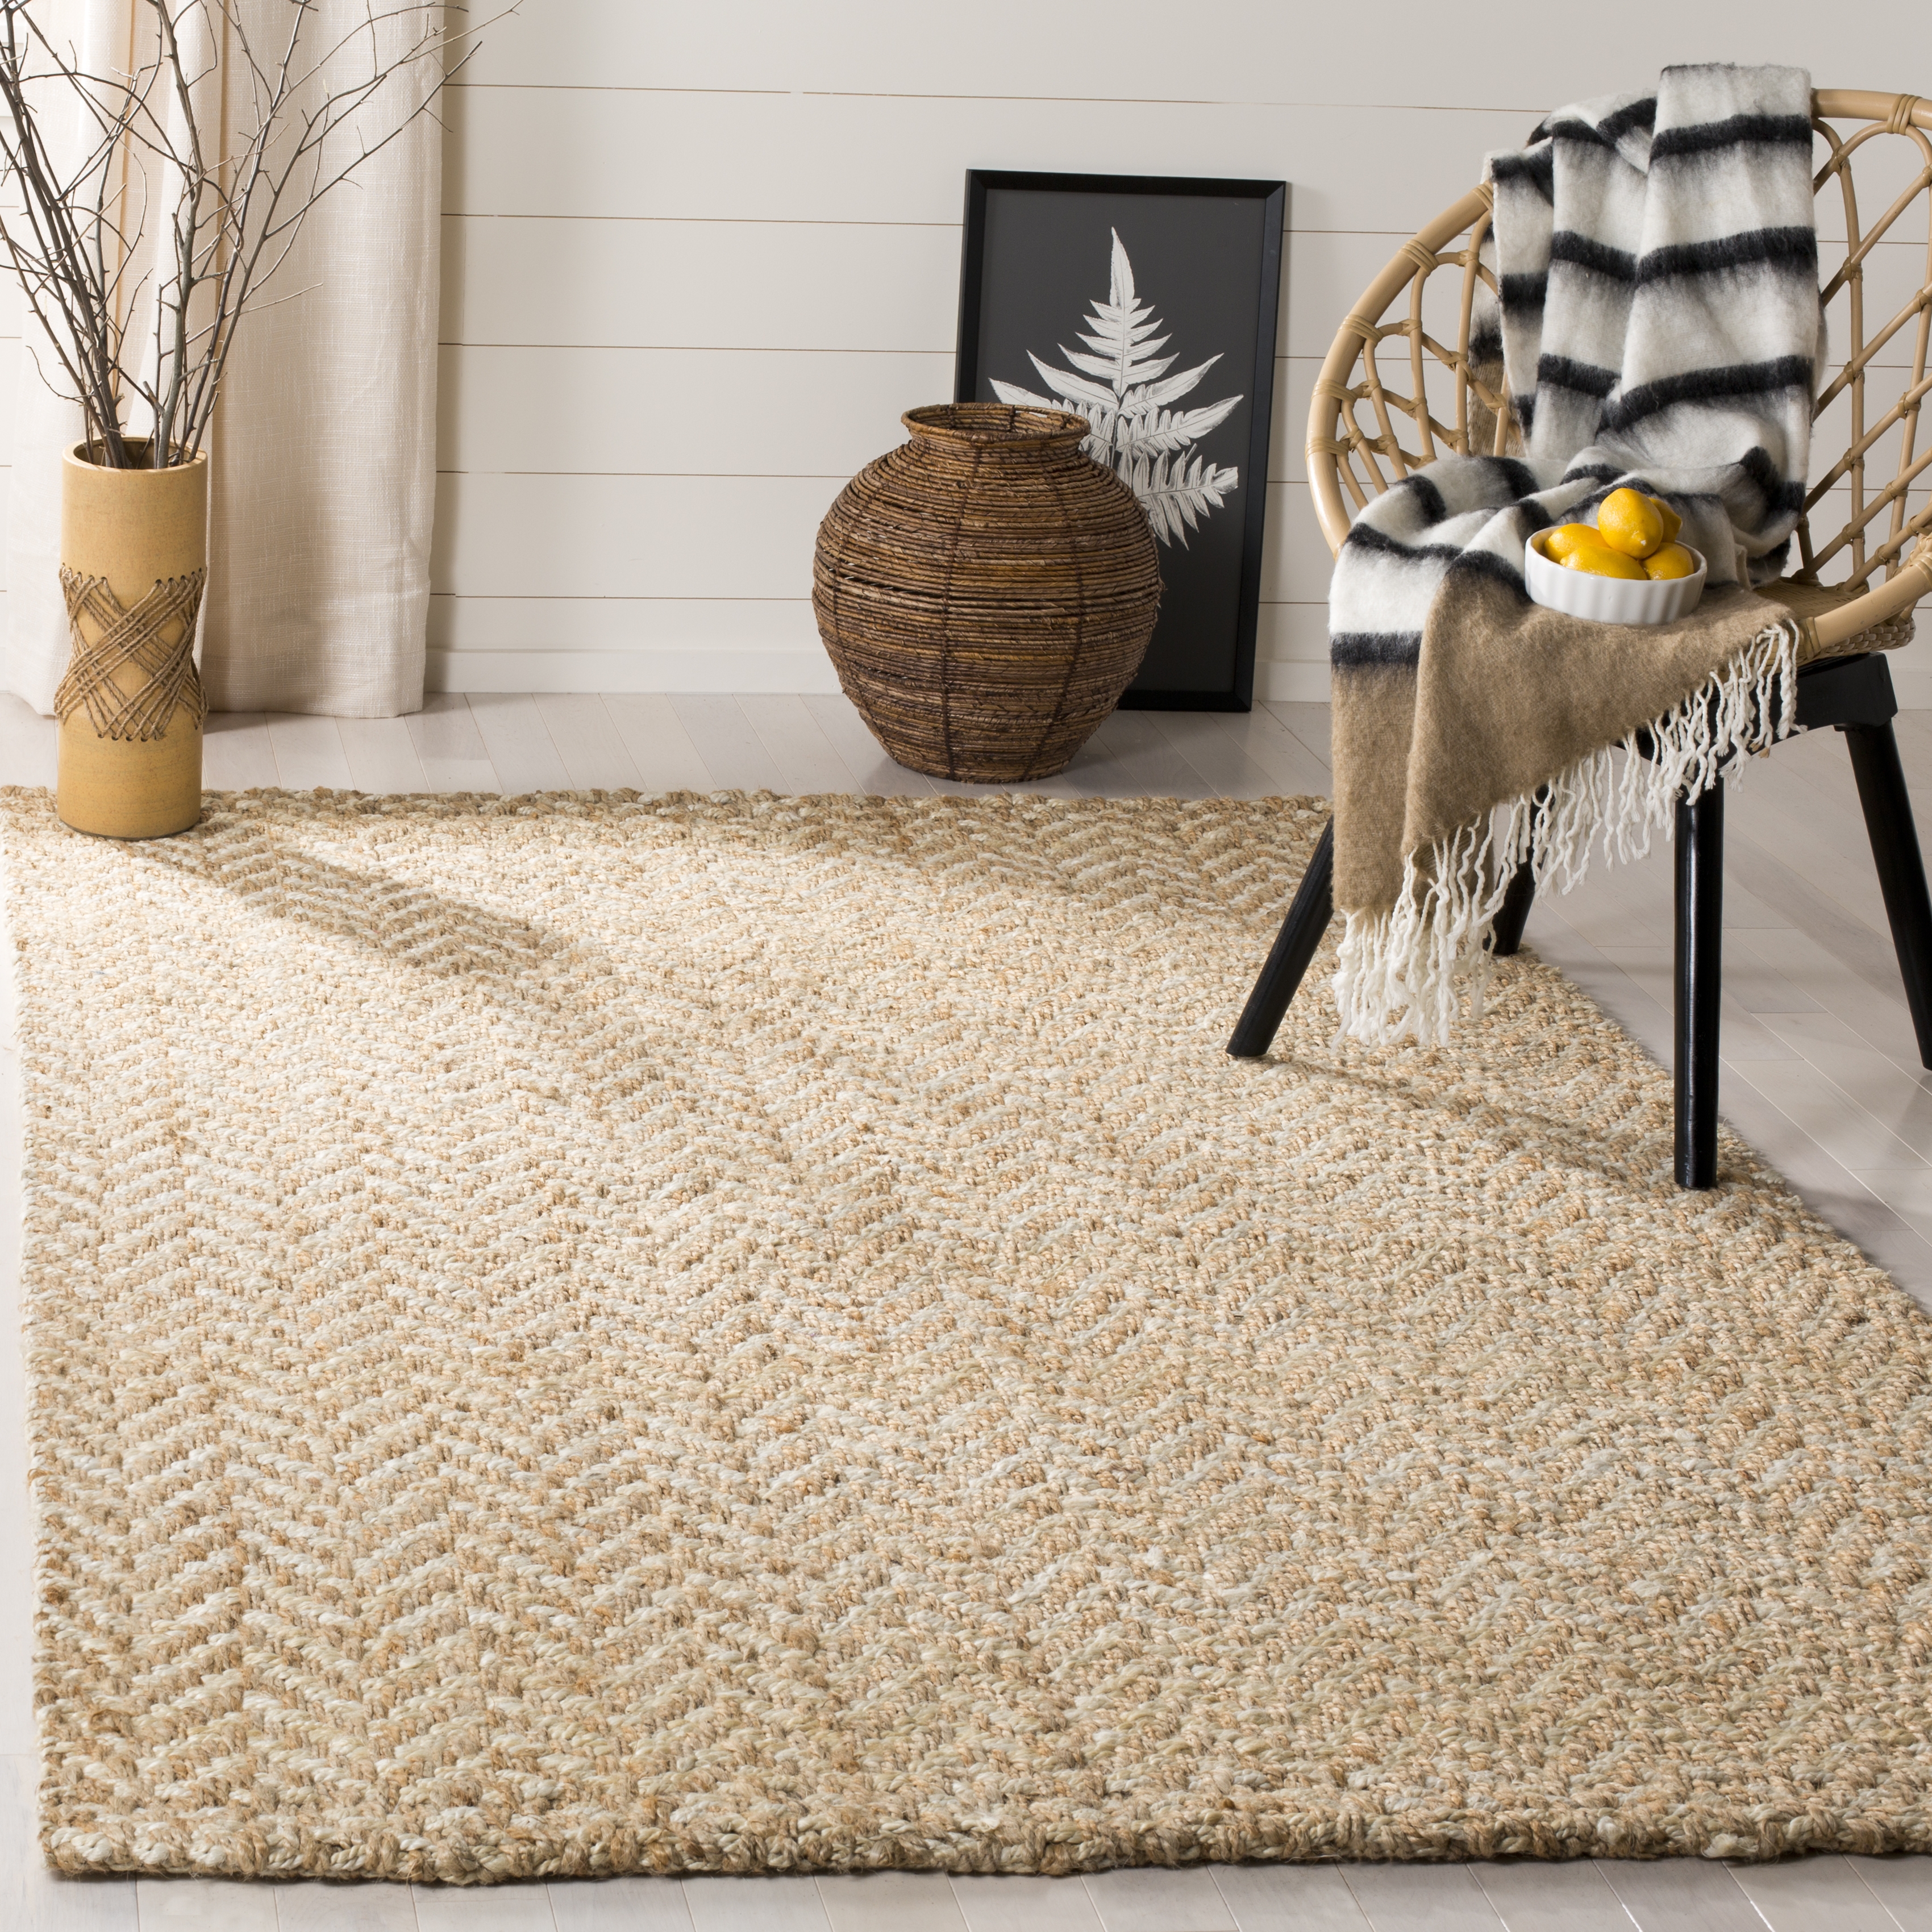 Arlo Home Hand Woven Area Rug, NF264A, Ivory/Natural,  9' X 12' - Image 1